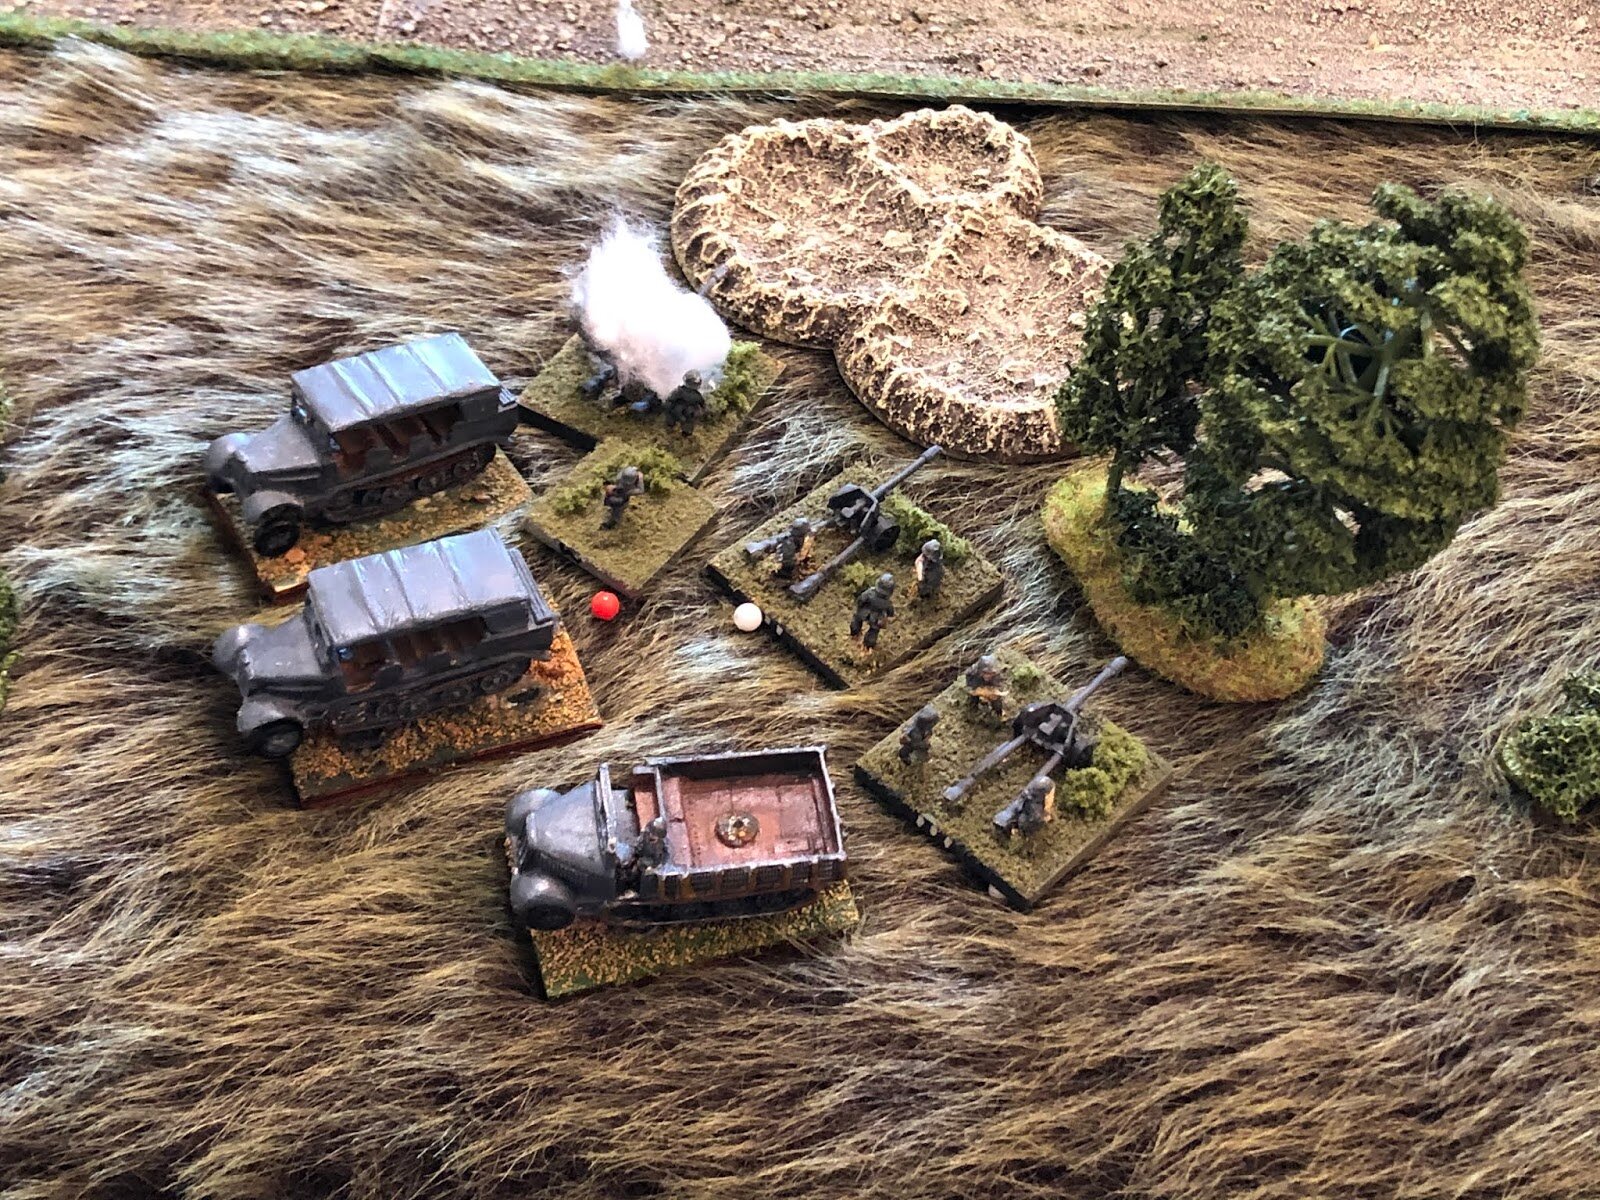  The ATG Platoon Commander is suppressed and weeping as his precious Gun Crew #1 is obliterated by the enemy mortar barrage!!!  Looks like they'll receive those Iron Crosses posthumously...  The Germans now have ZERO anti-tank guns in action as Gun #